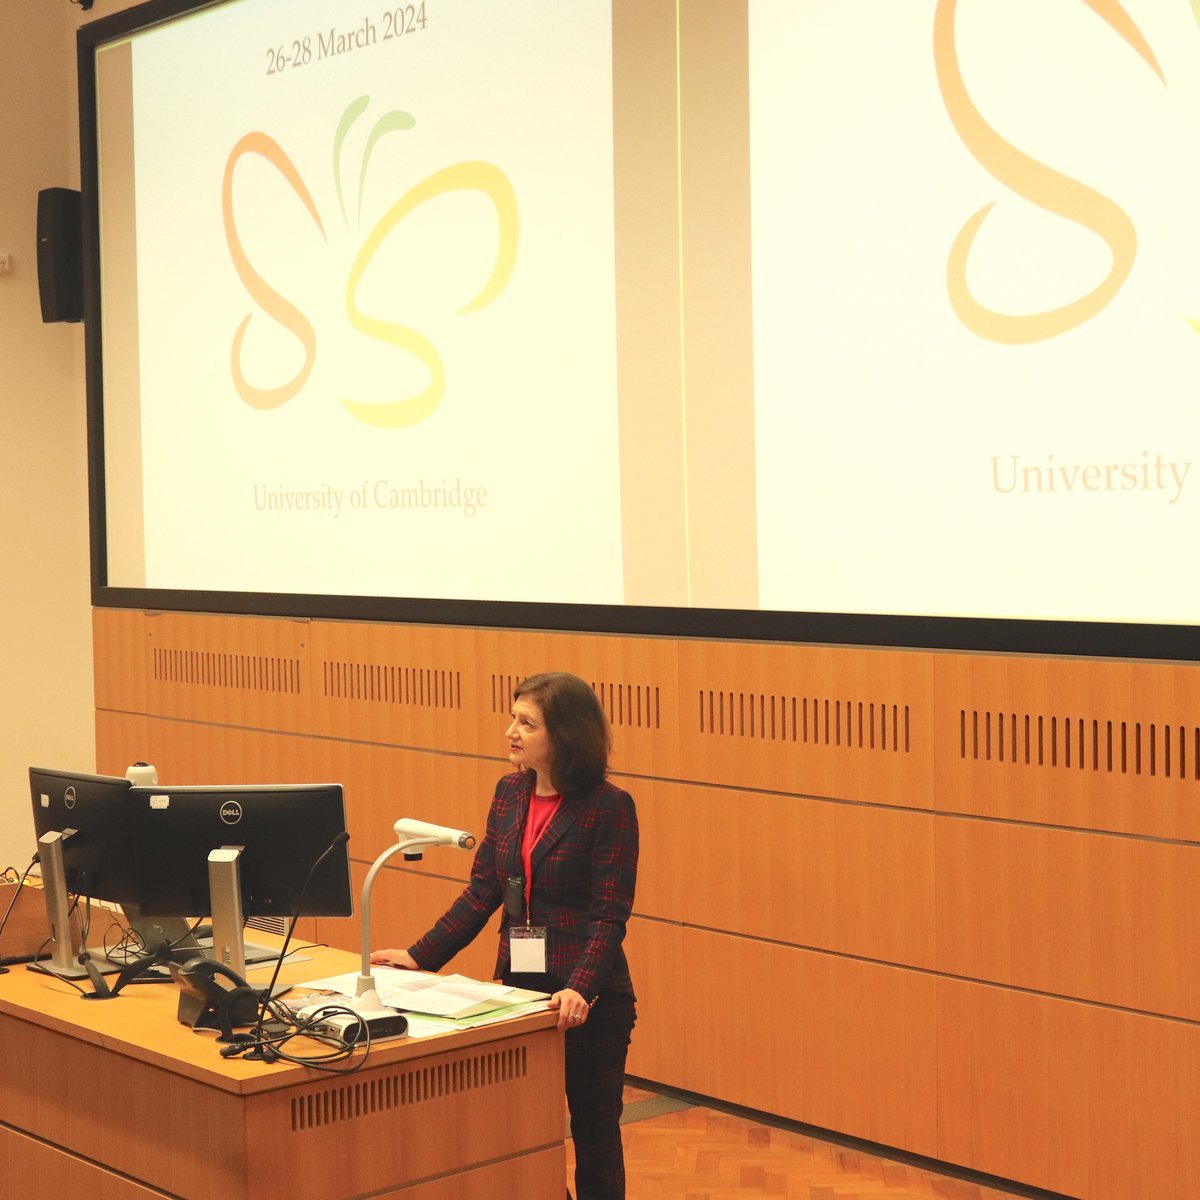 Thank you to @Cambridge_Uni Vice-Chancellor Professor Deborah Prentice for kicking off SCCS 2024 - Inspiring words to set the stage for three days of talks🎙️, posters 📊, workshops 👩‍💼 and events 🪩!